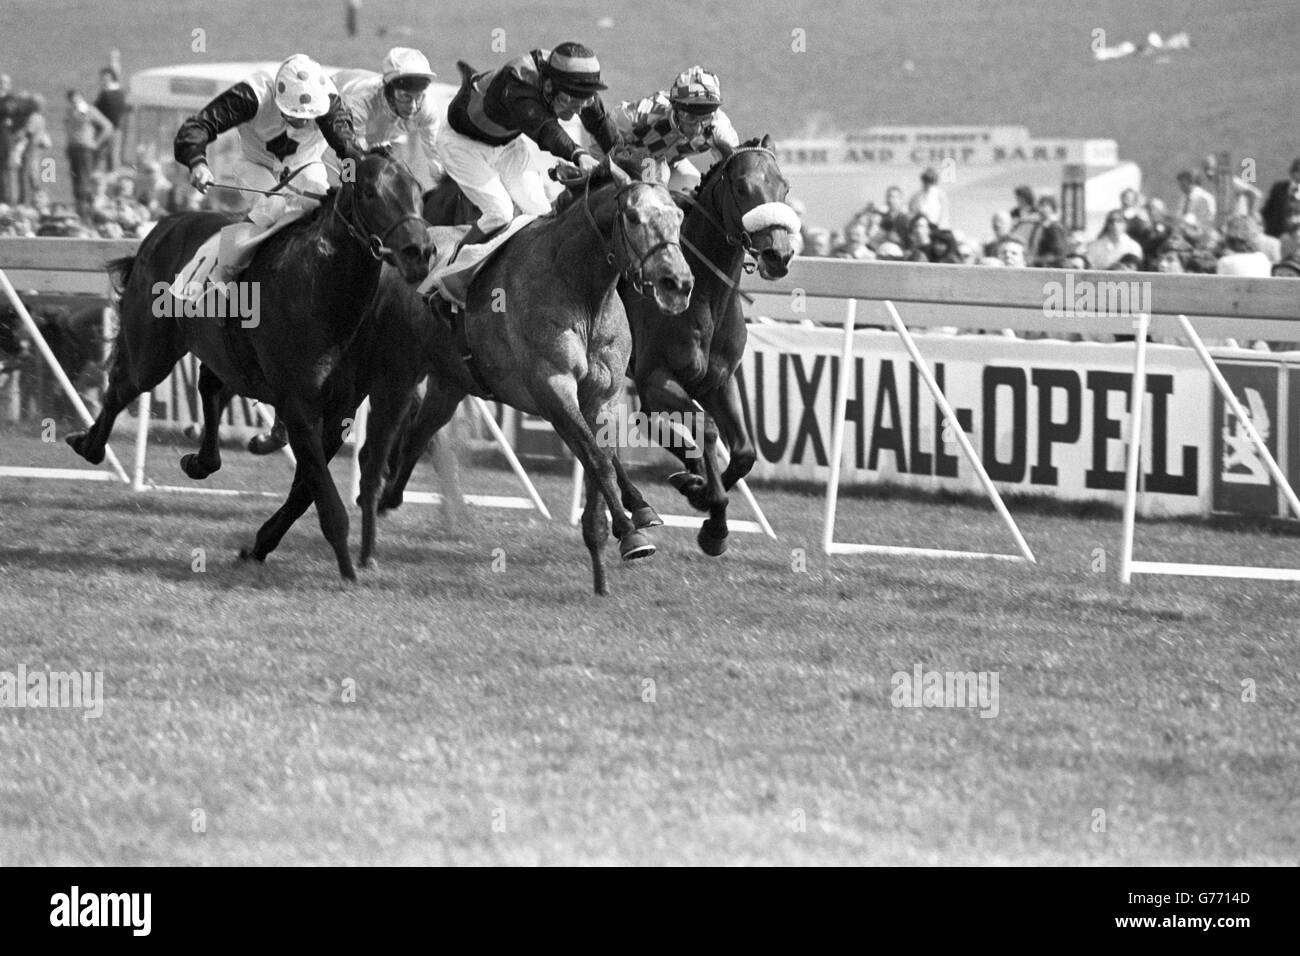 Count Pahlen (centre), with G Baxter riding, wins the Blue Riband Trial Stakes at Epsom, followed by Steel Bay with J Reid (left) and Vin St Benet with R Curant (right). Behind in fourth place is Lester Piggott on Bancario. Stock Photo